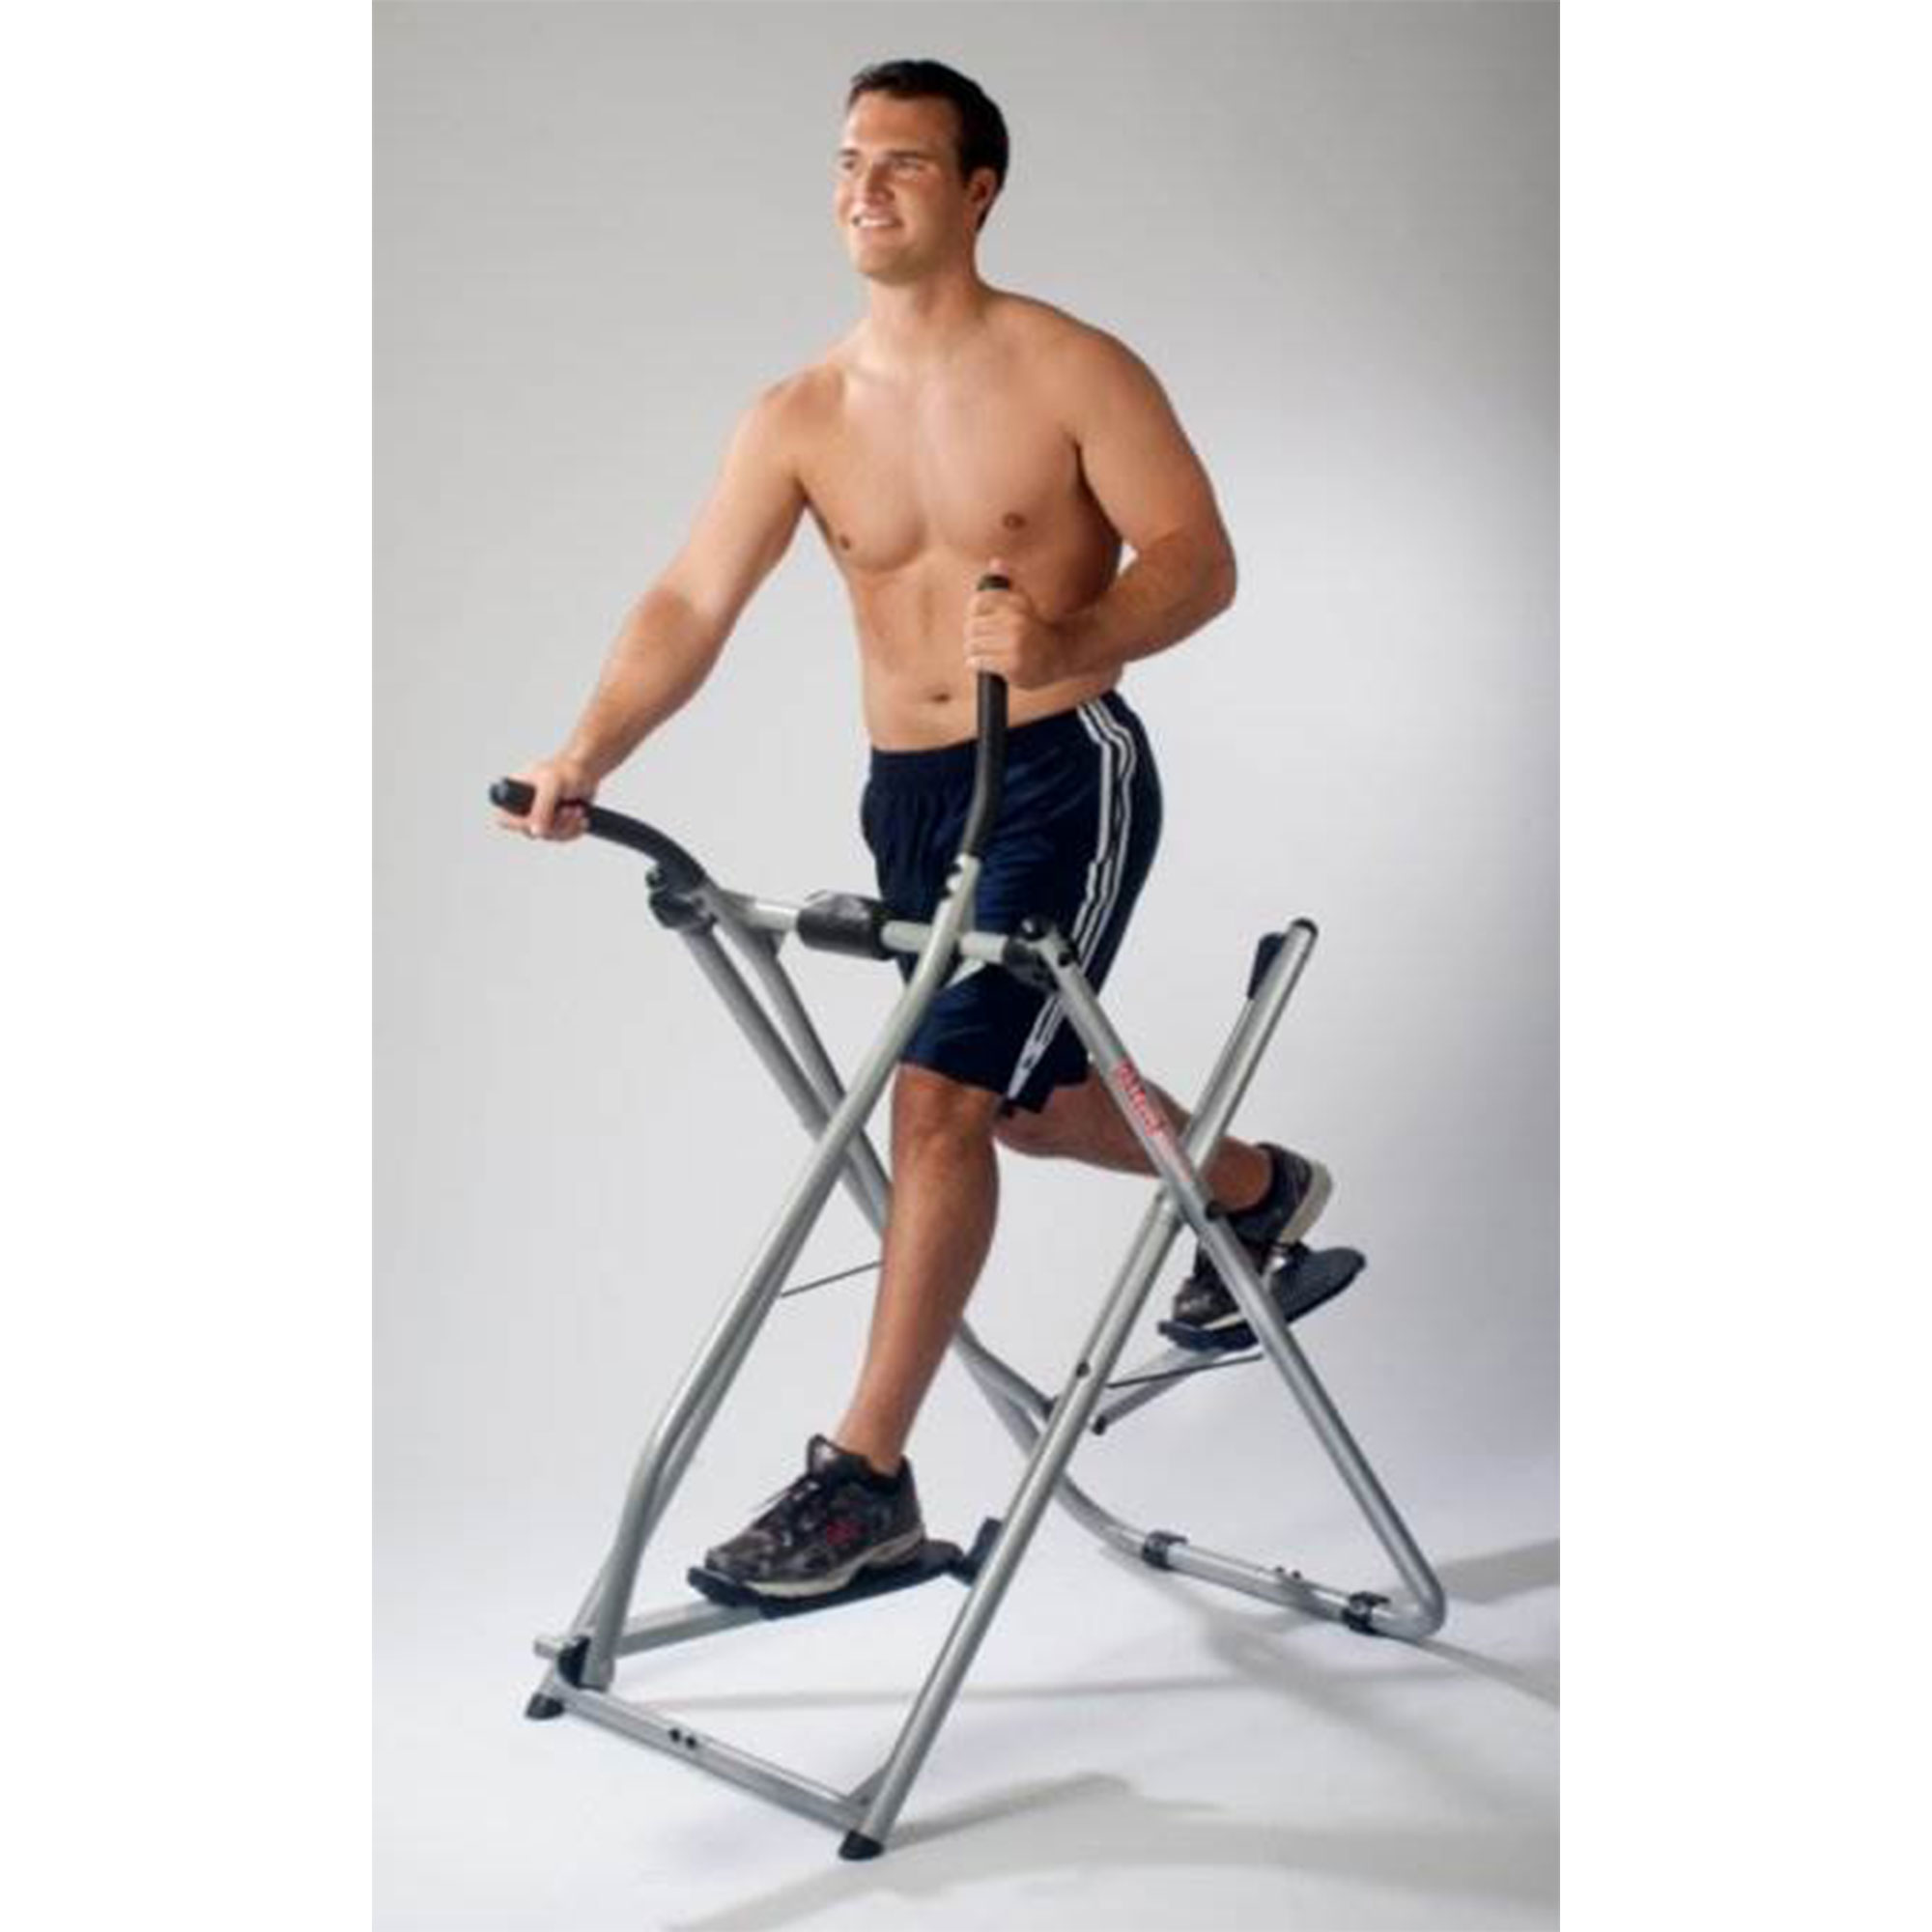 Gazelle Edge Glider Home Fitness Exercise Equipment Machine w/ Workout DVD - image 10 of 12